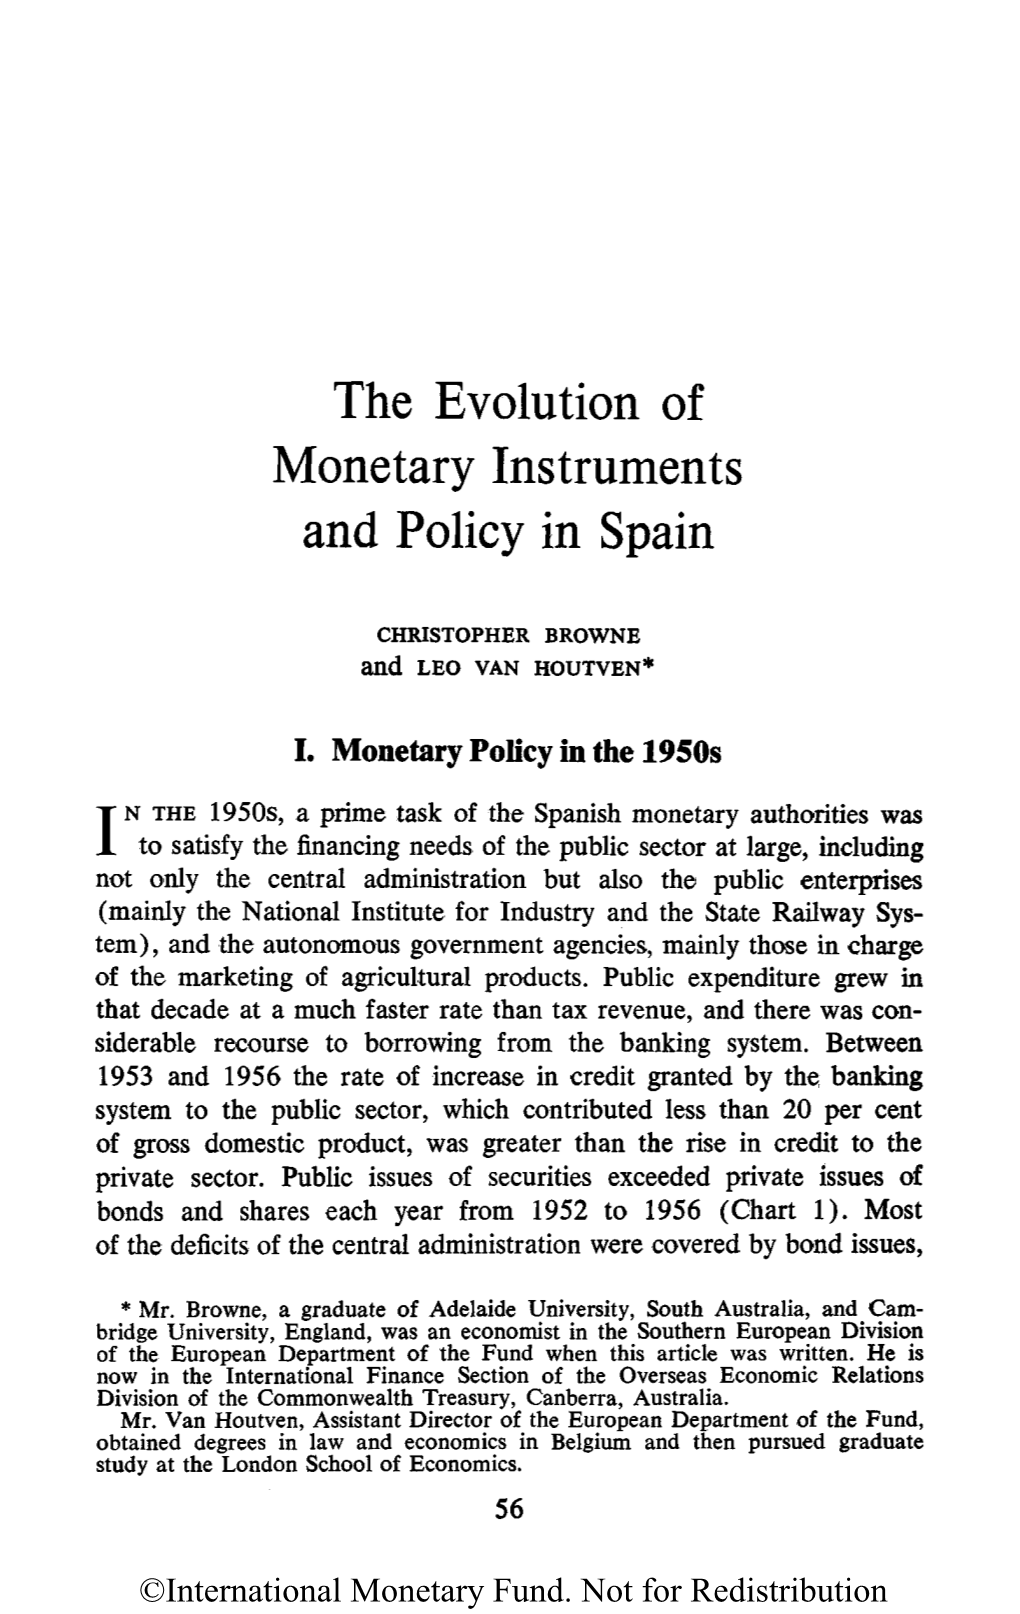 The Evolution of Monetary Instruments and Policy in Spain